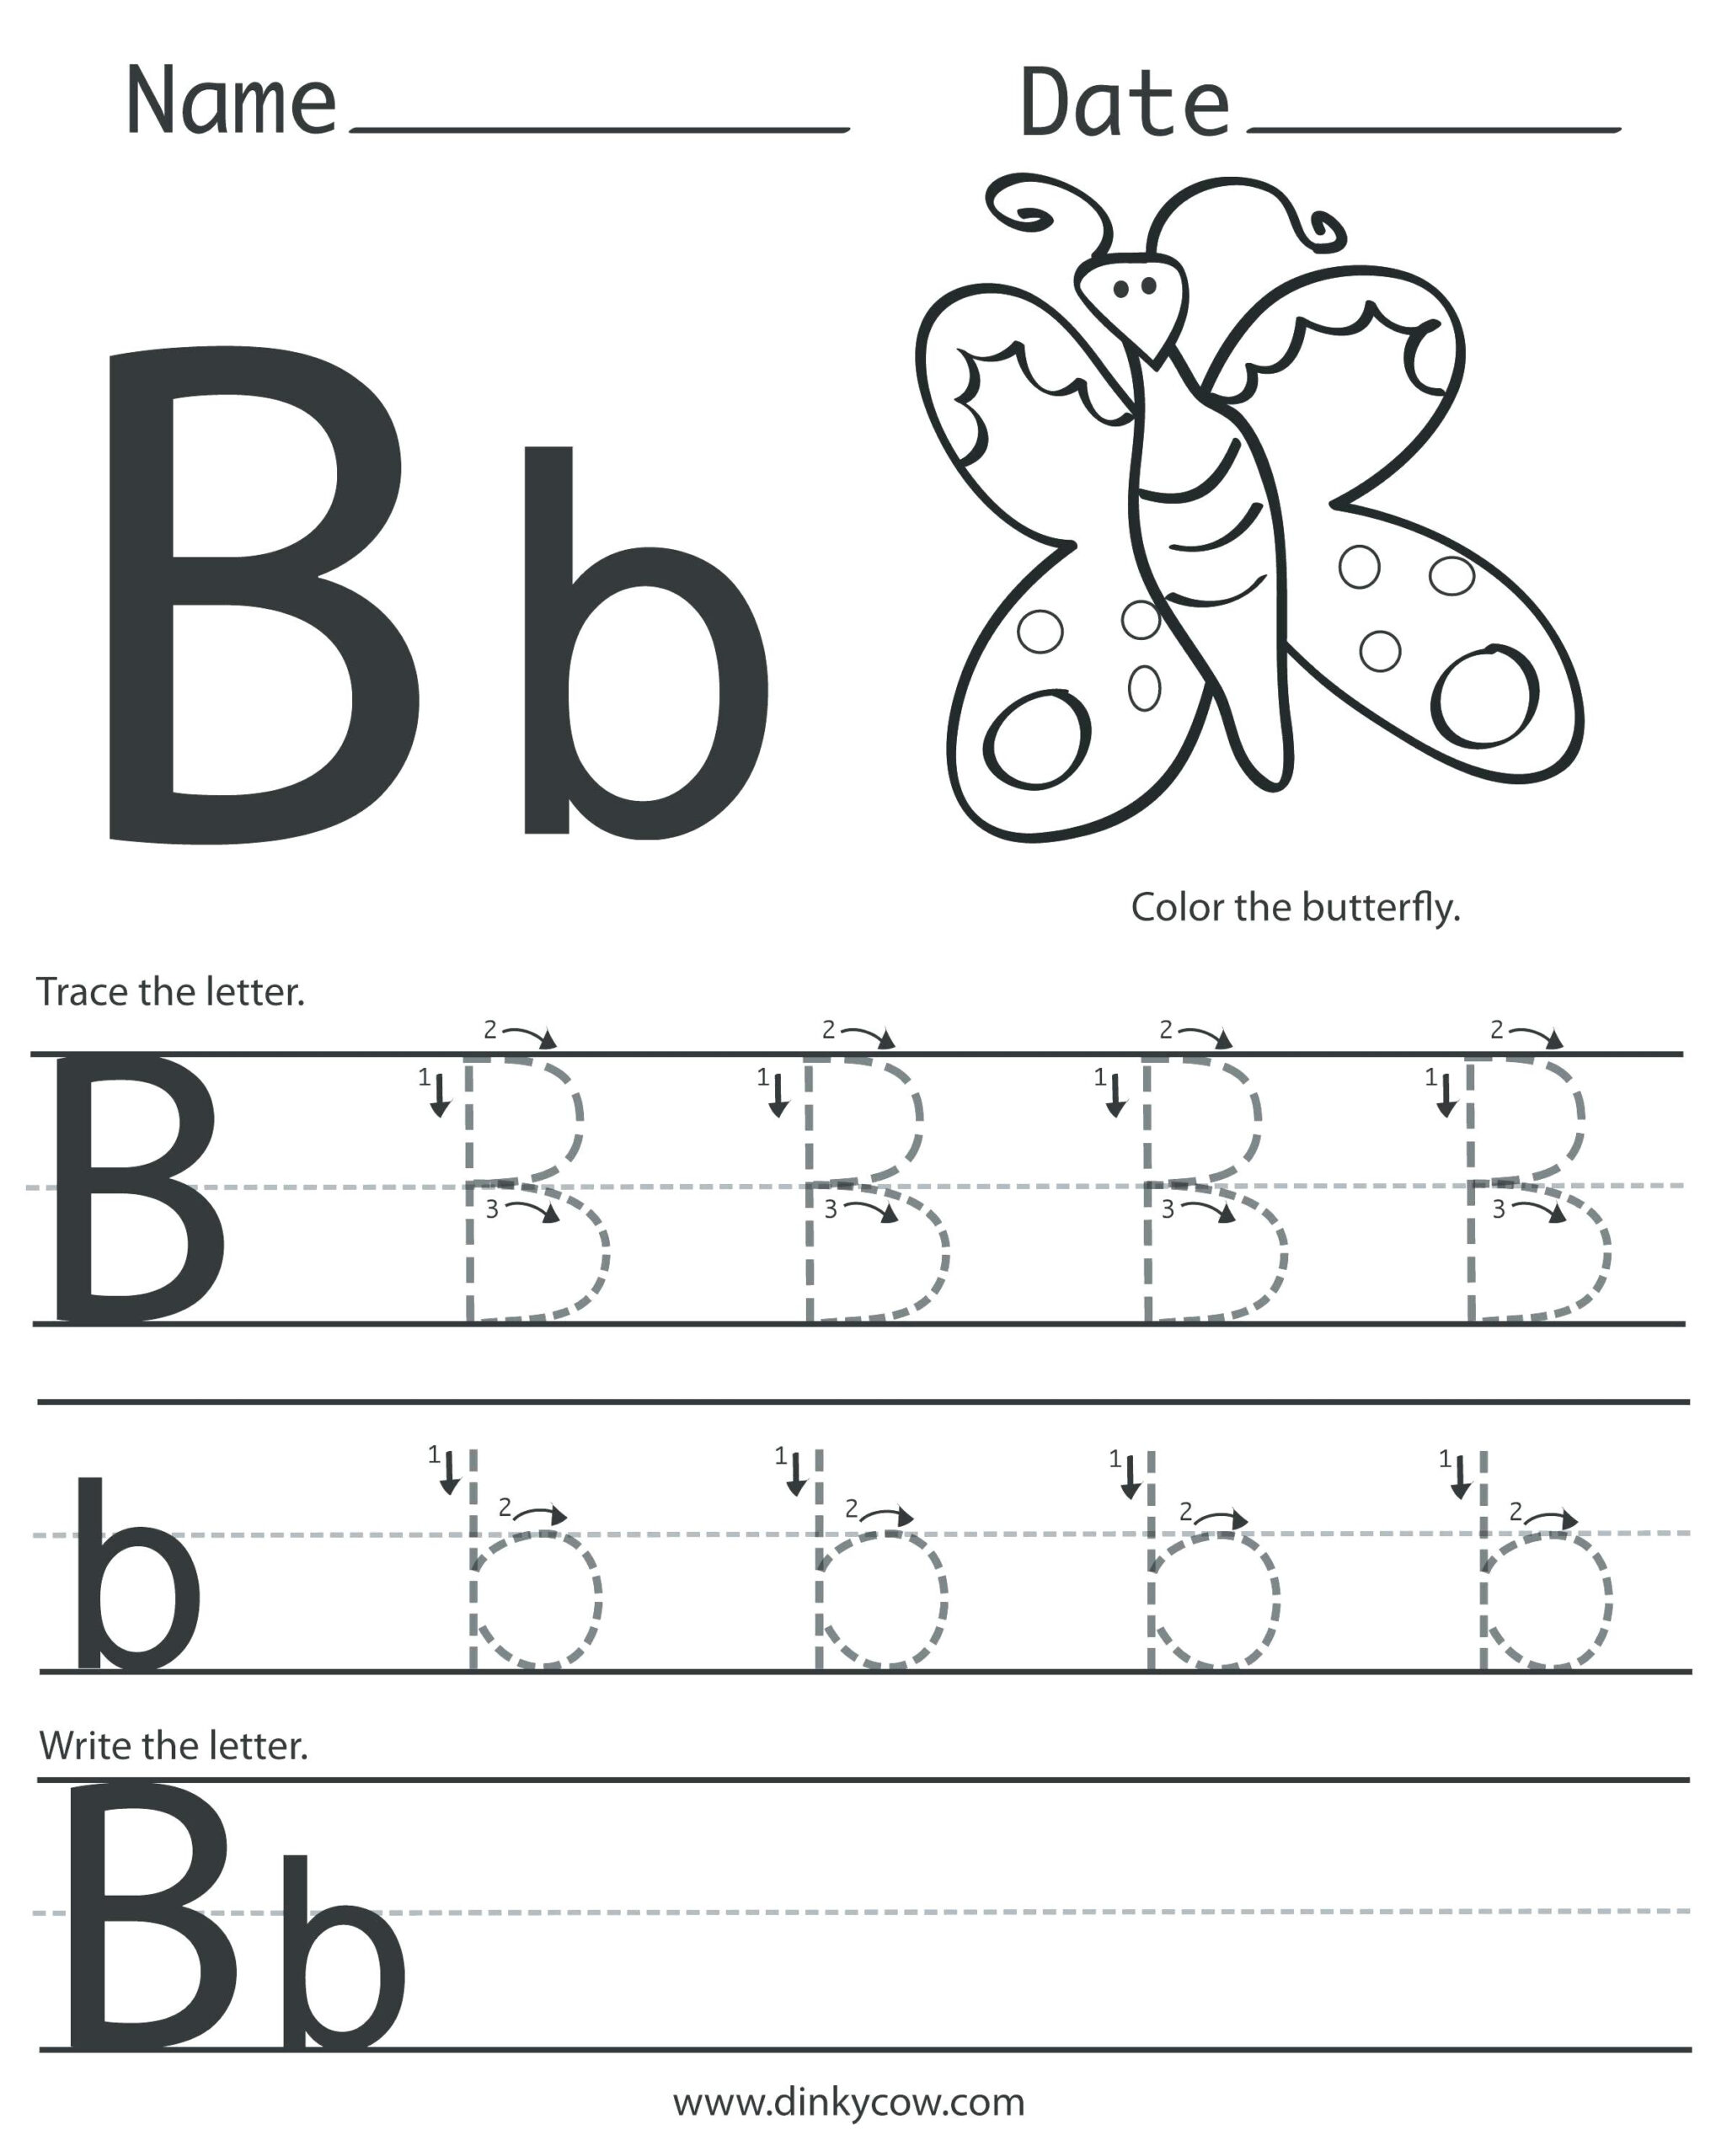 Letter B Tracing Worksheet Preschool - Clover Hatunisi intended for Letter B Tracing Pages